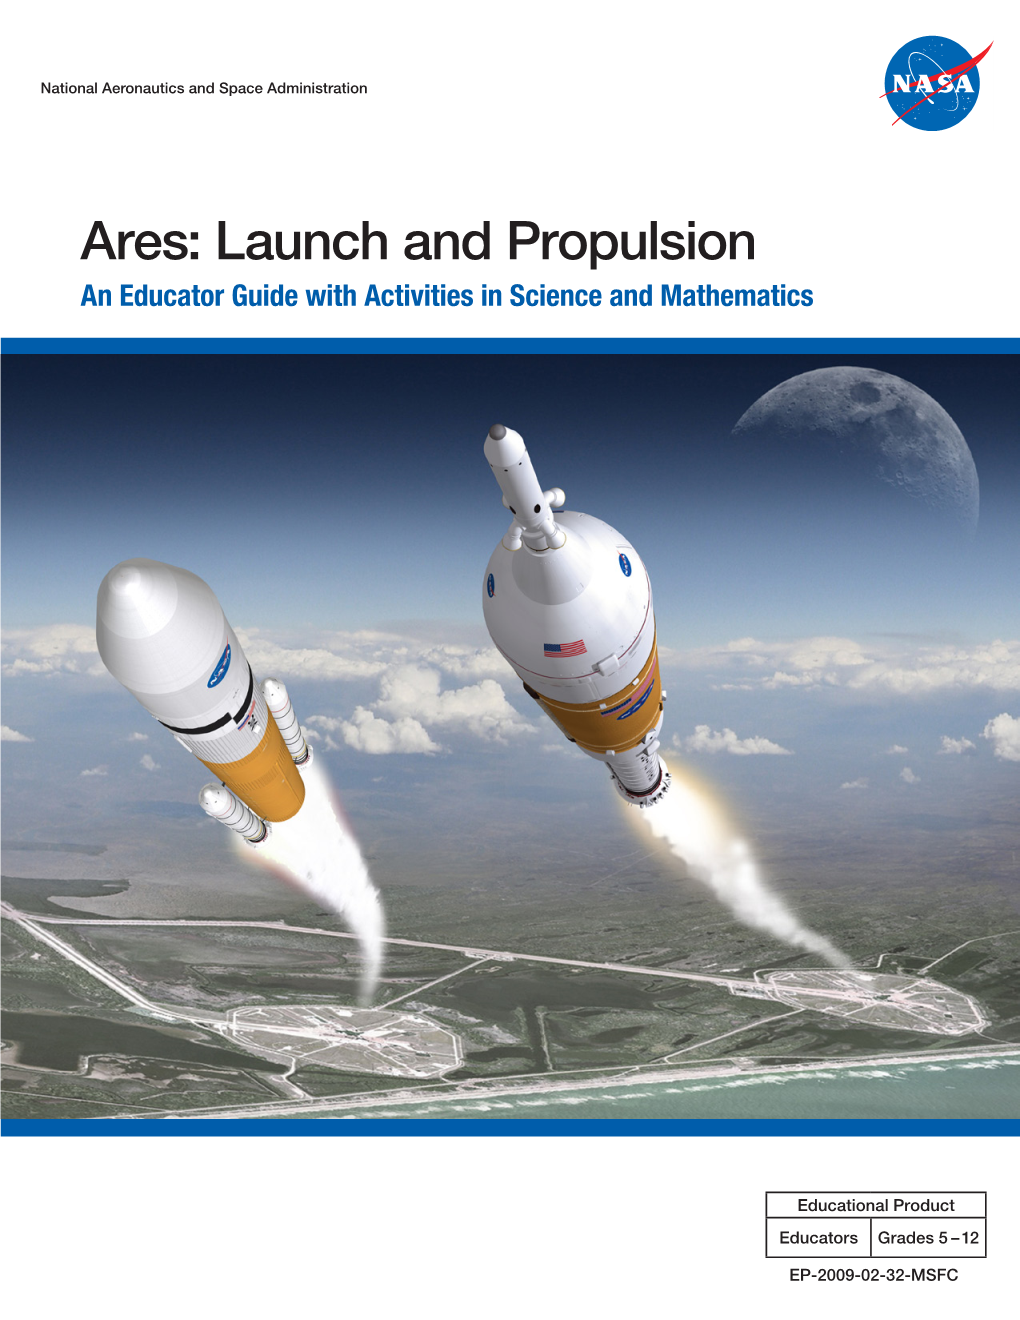 Ares: Launch and Propulsion an Educator Guide with Activities in Science and Mathematics